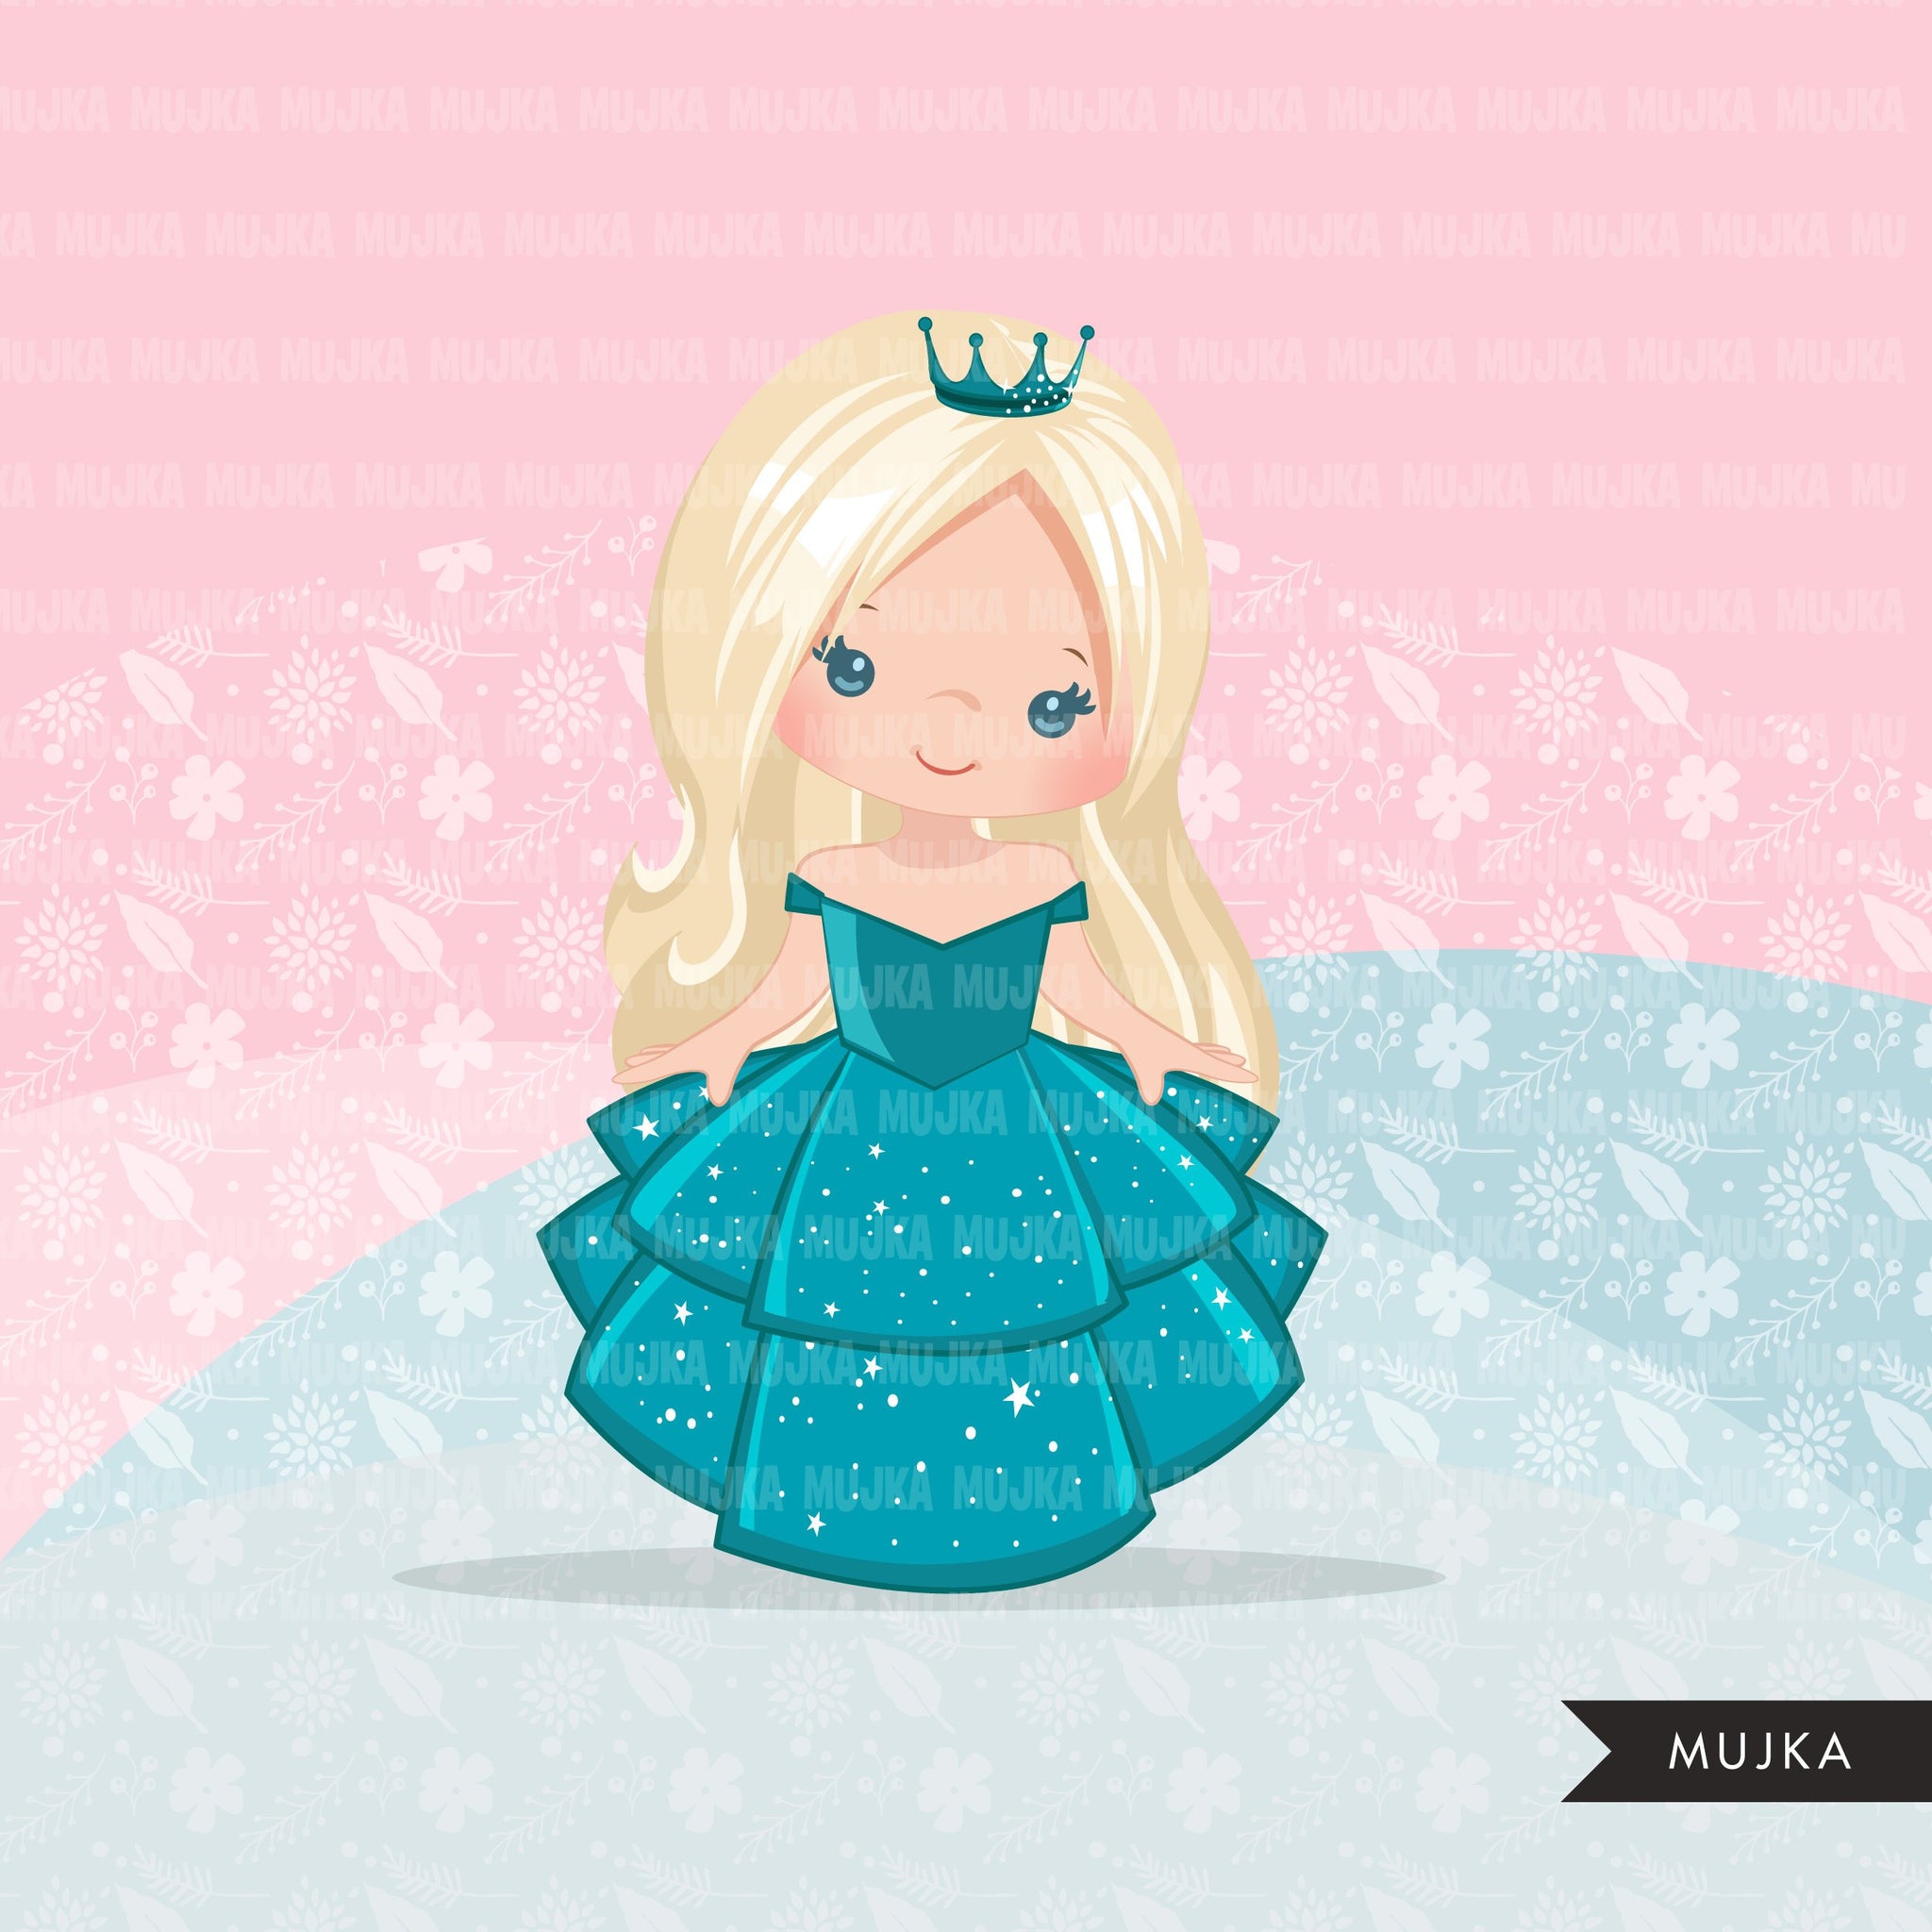 Princess clipart, fairy tale graphics, girls story book, teal princess dress, commercial use clip art